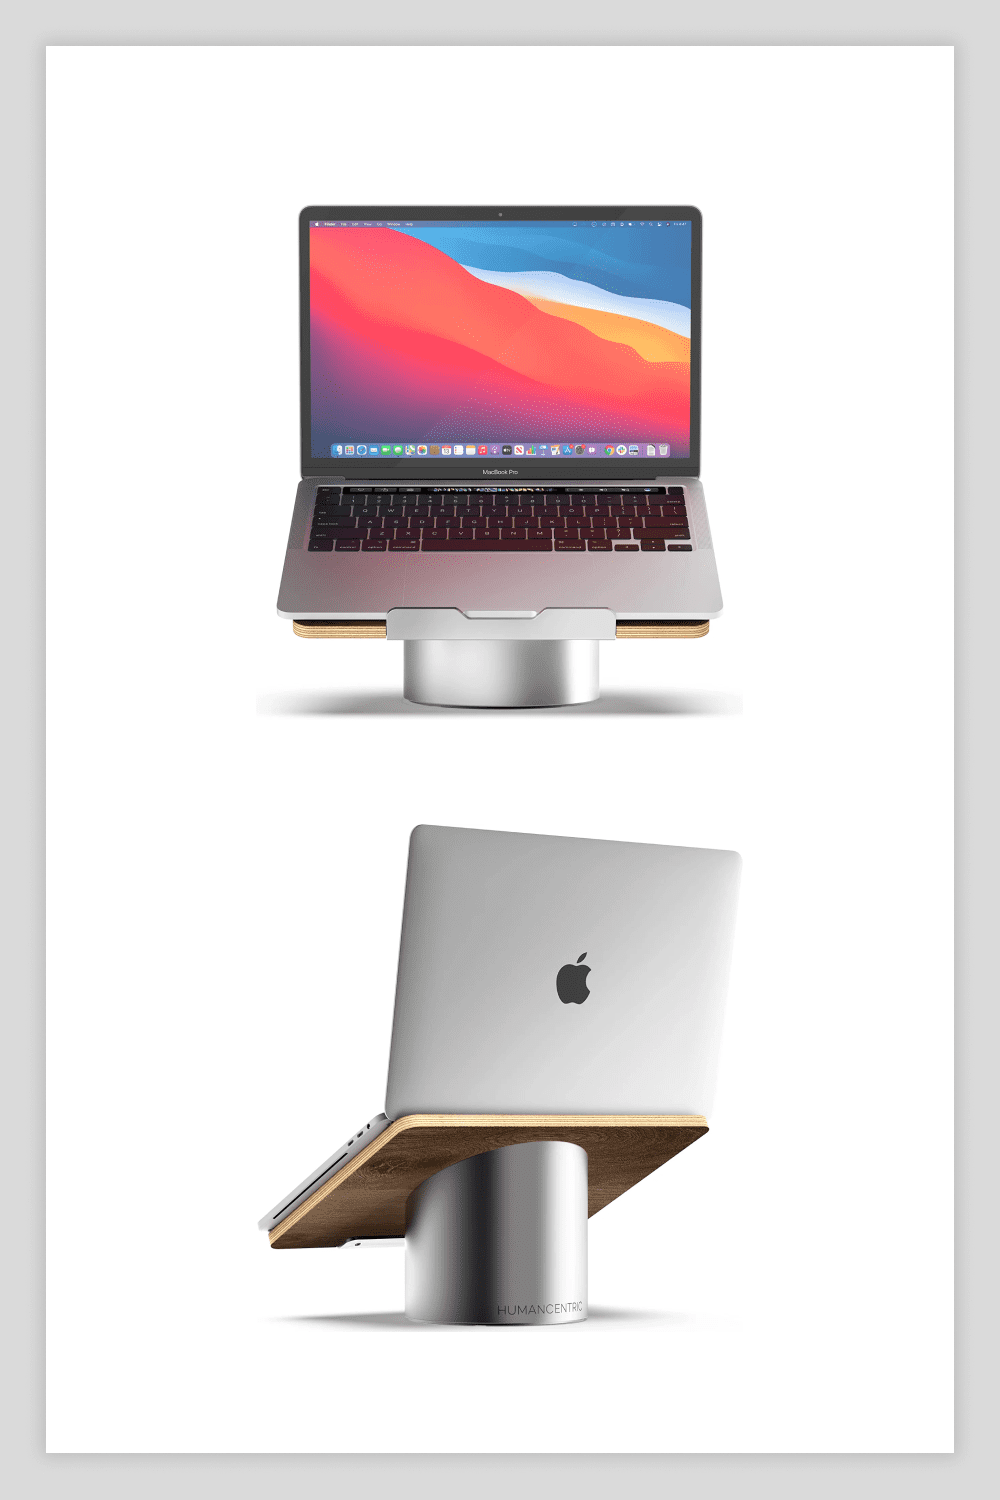 A collage of images of a laptop stand with a macbook on them.